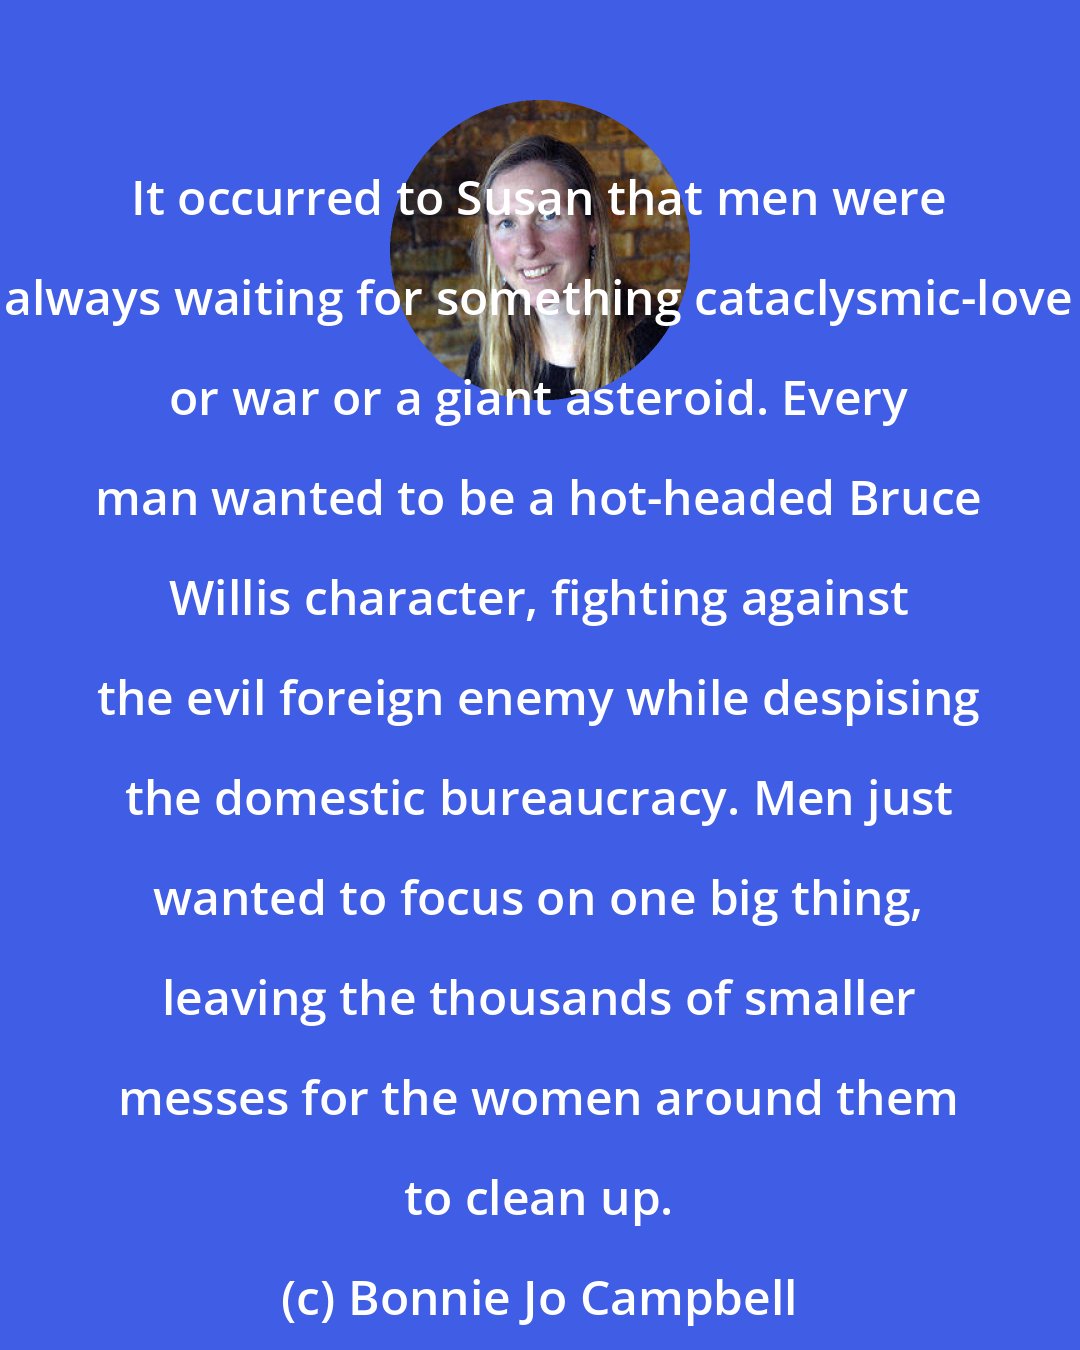 Bonnie Jo Campbell: It occurred to Susan that men were always waiting for something cataclysmic-love or war or a giant asteroid. Every man wanted to be a hot-headed Bruce Willis character, fighting against the evil foreign enemy while despising the domestic bureaucracy. Men just wanted to focus on one big thing, leaving the thousands of smaller messes for the women around them to clean up.